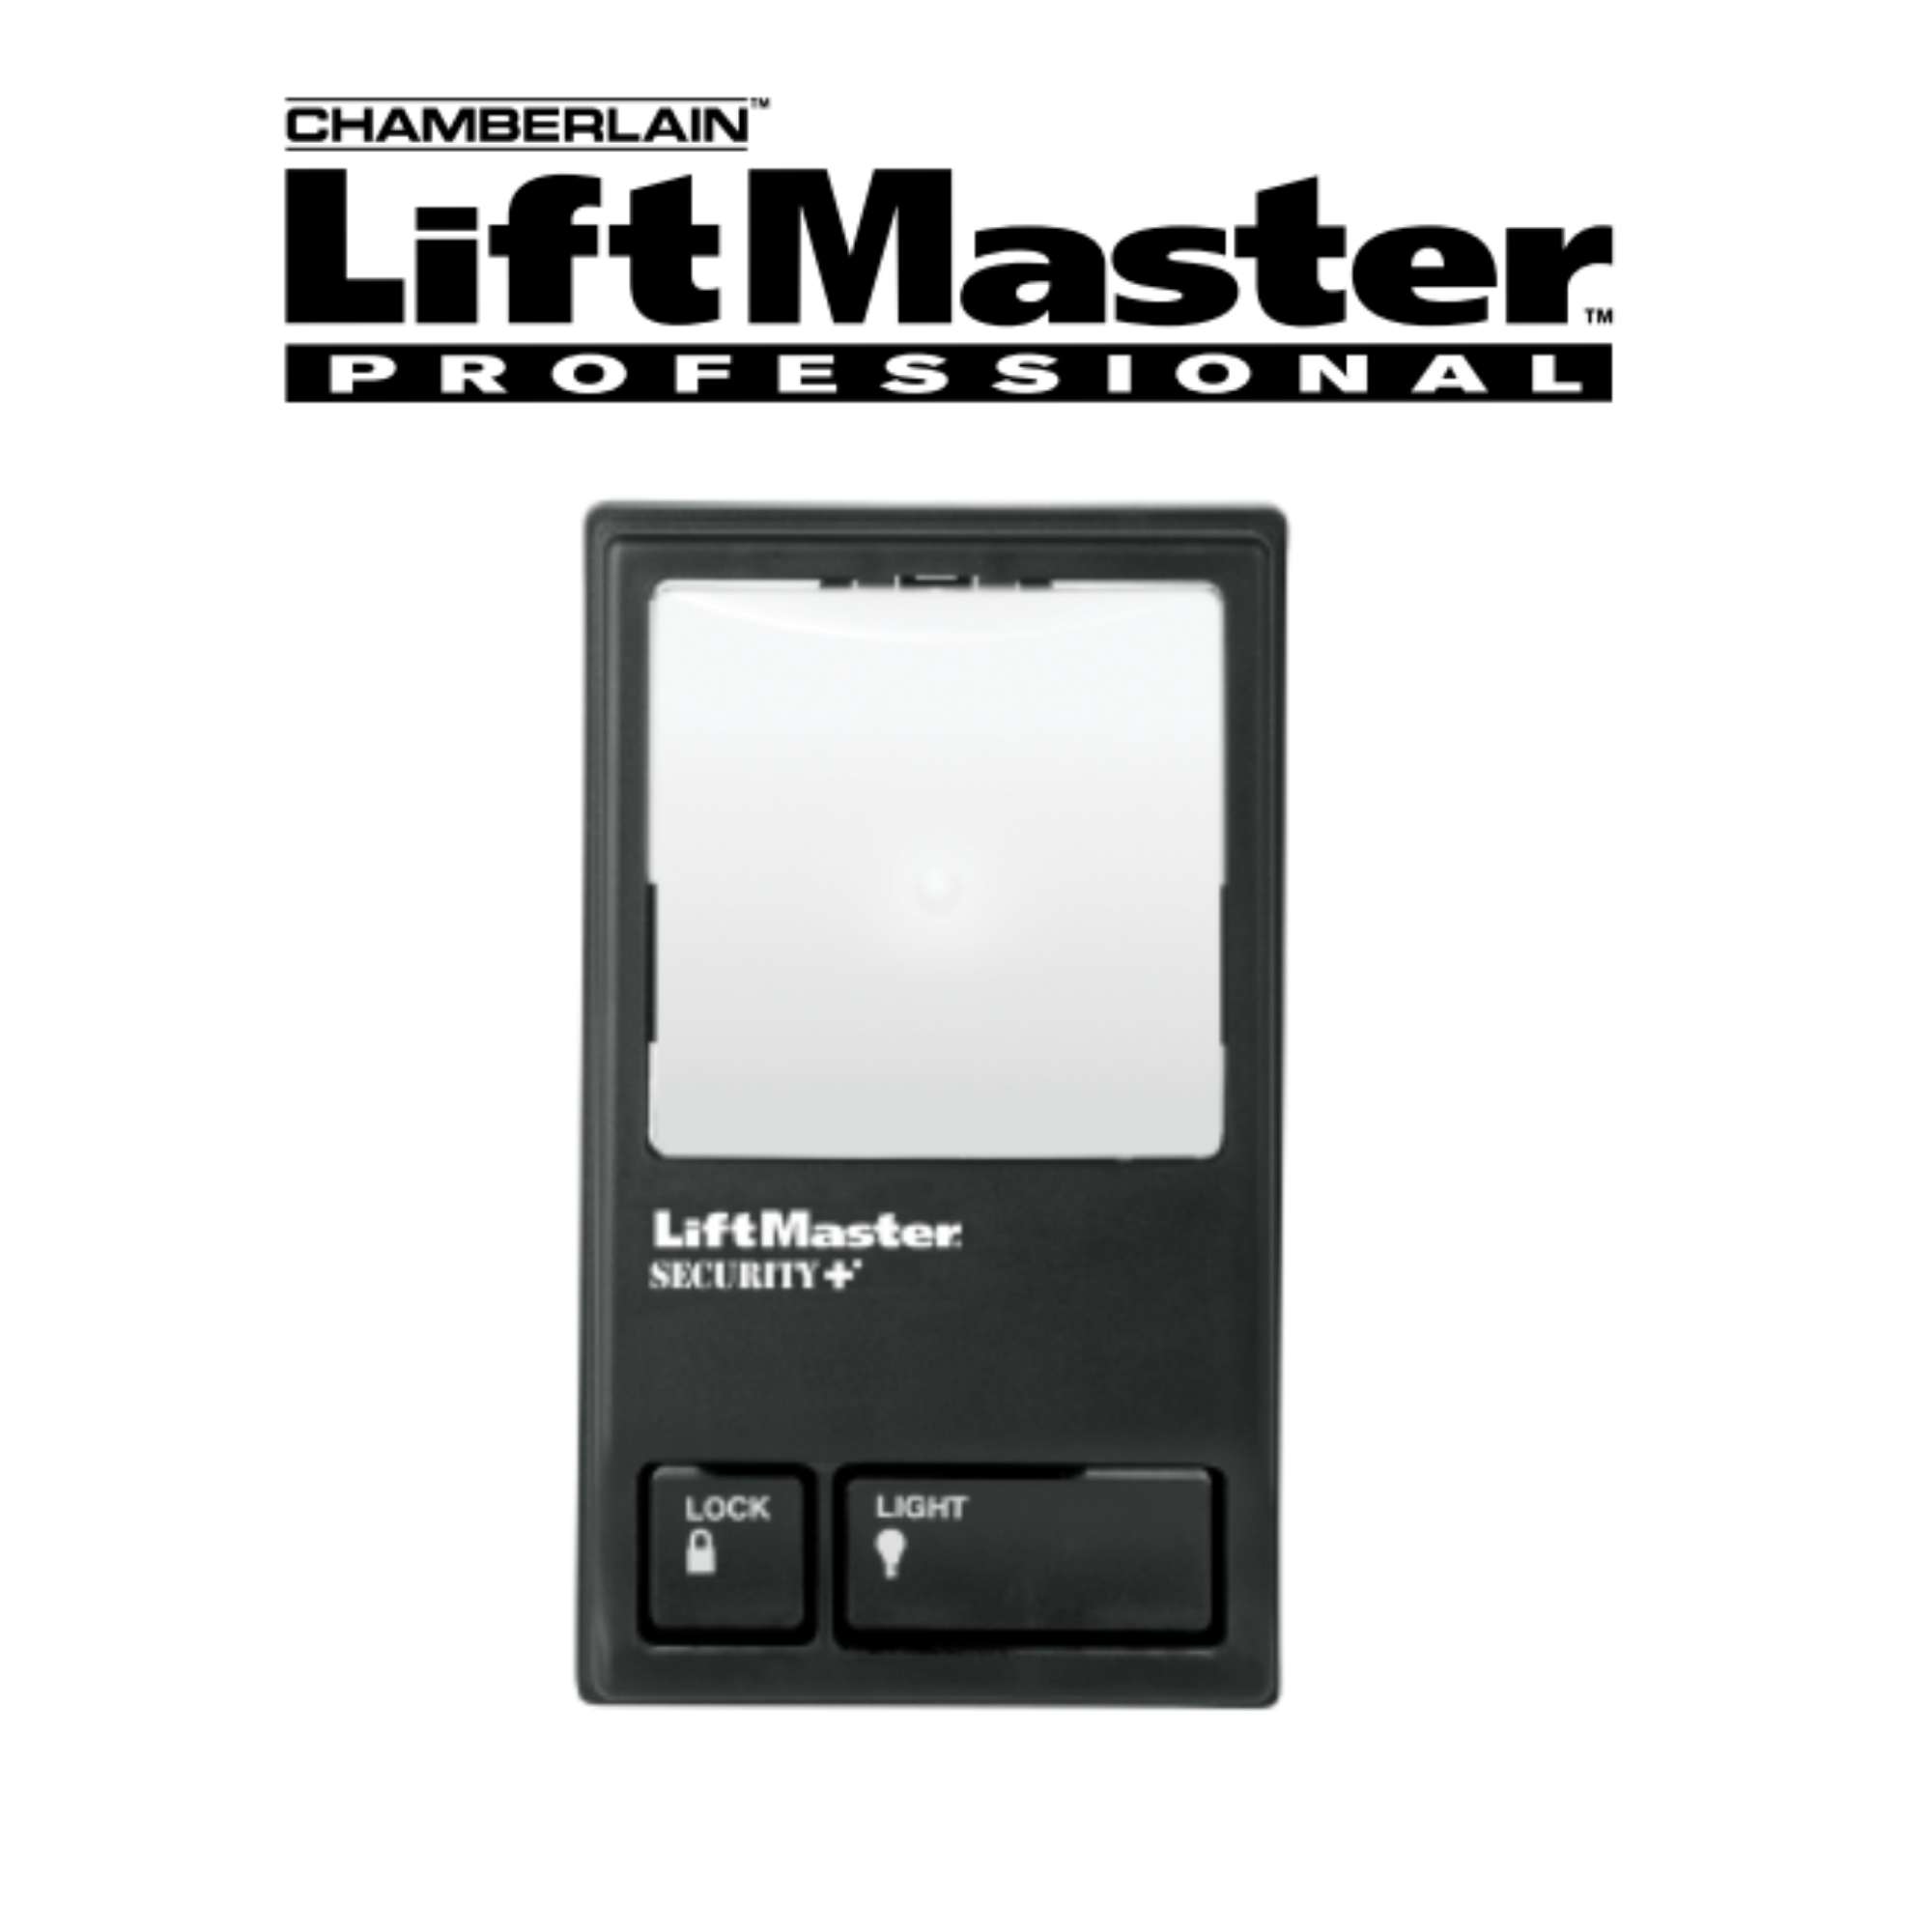 Instructions for Multi-Function Door Control 78LM and 78LMC